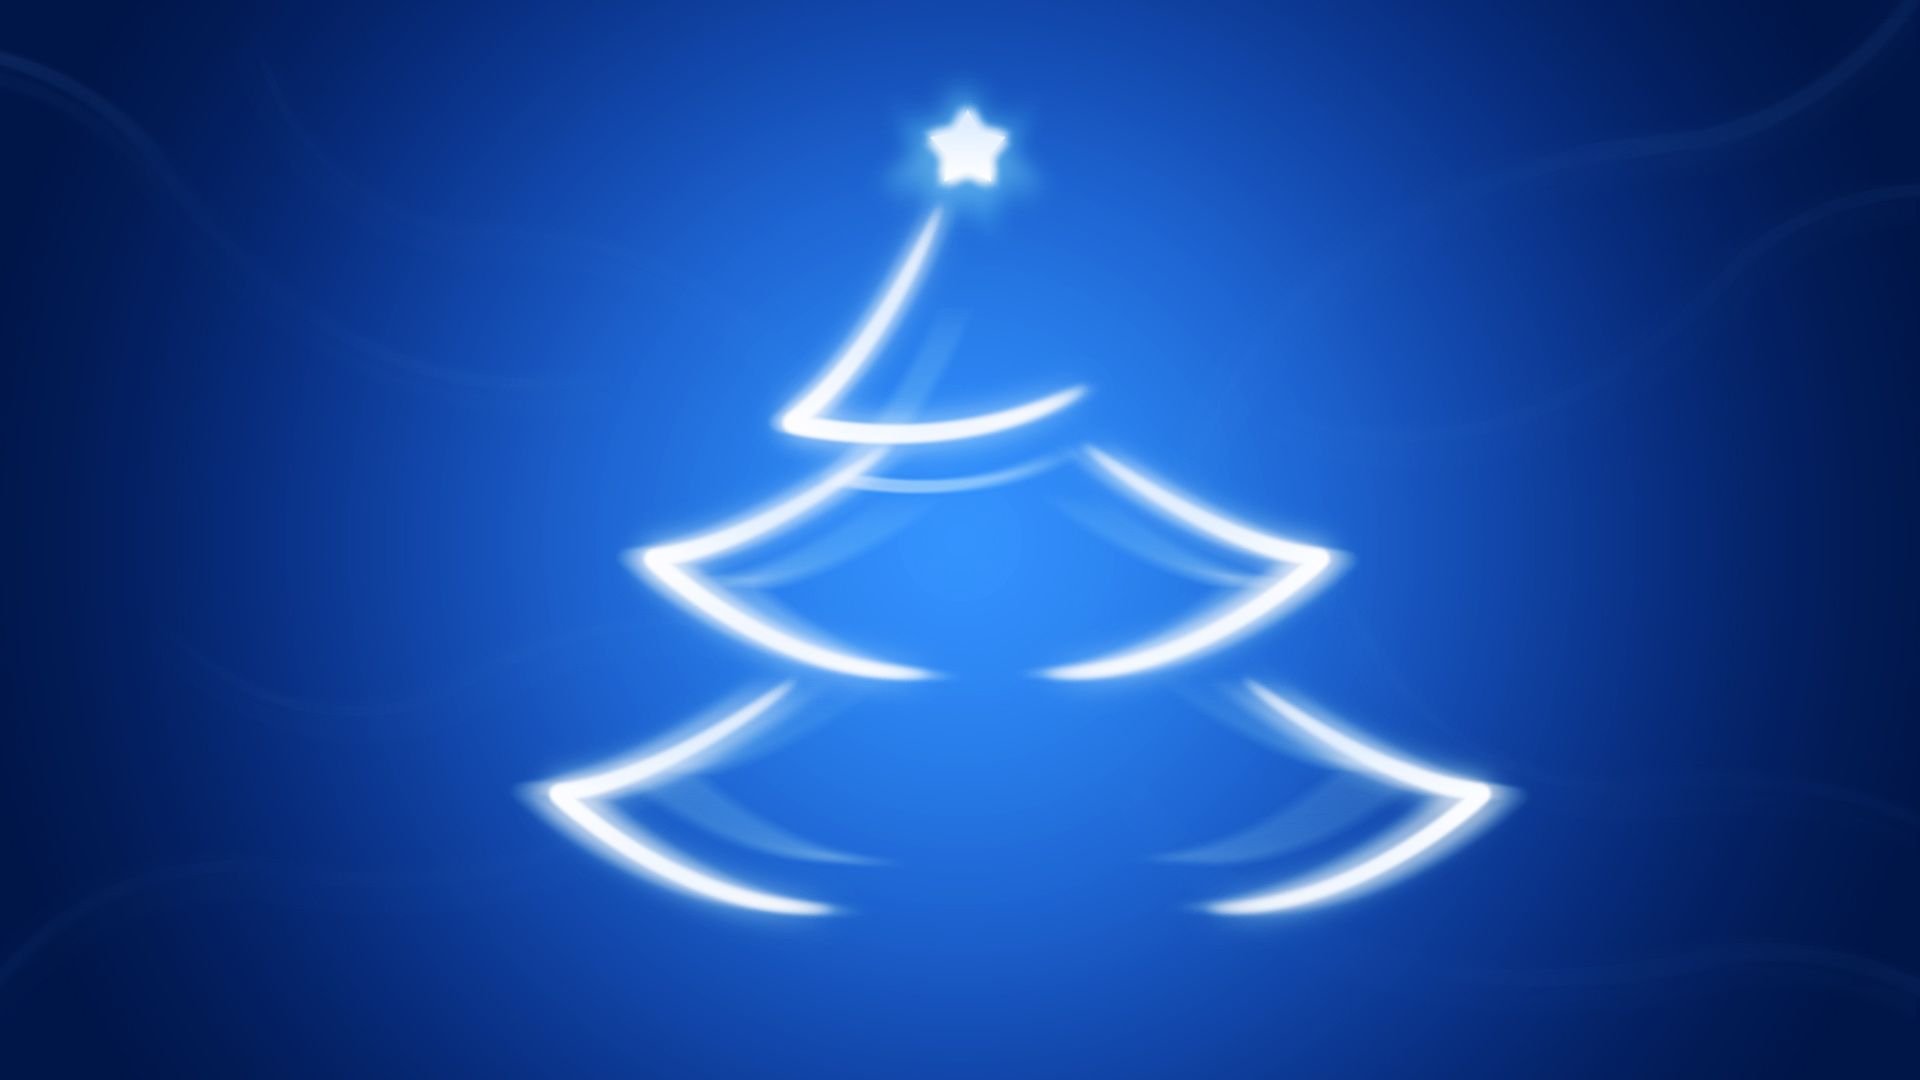 Christmas Tree Wallpaper, High Definition, High Quality, Widescreen